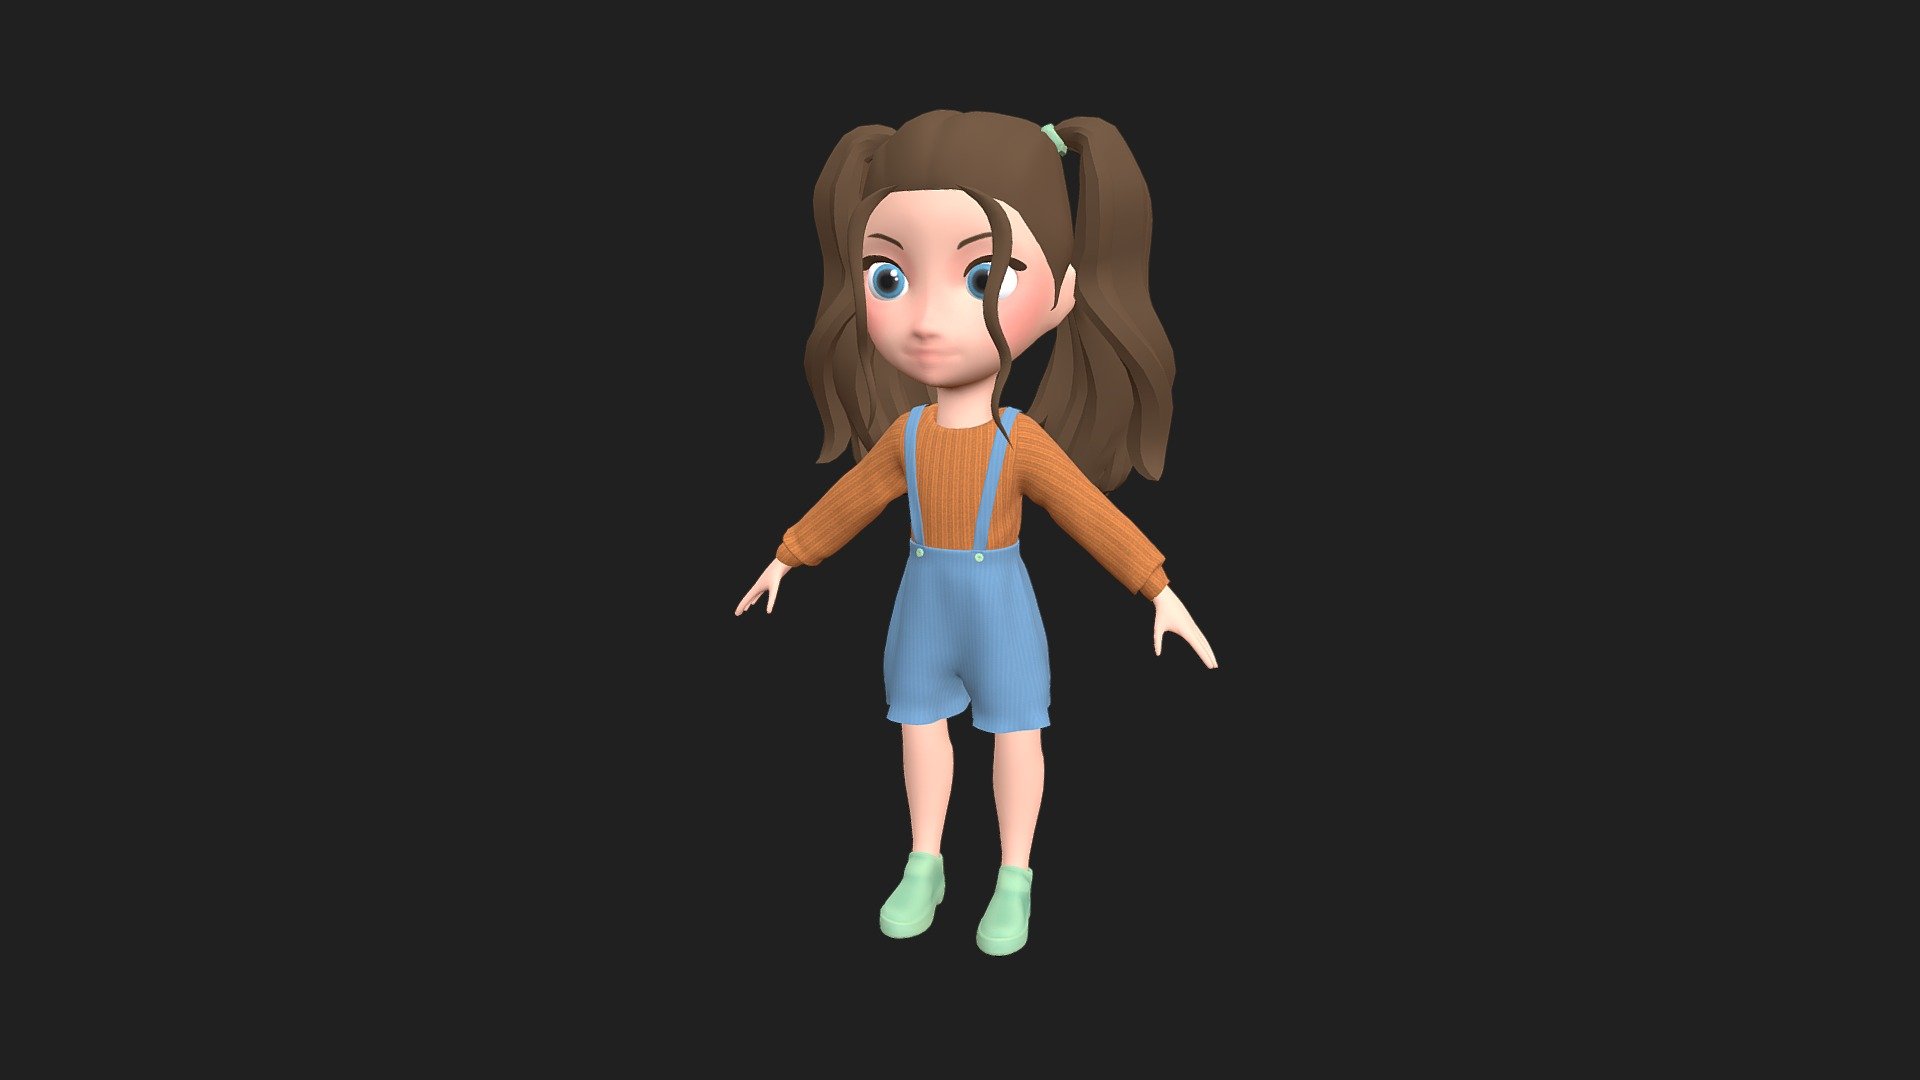 This little girl is called Aghata, she is a happy and funny OC that I've created inspired in my friend's daughter. 
She is the main character in a game (under production atm) and I am very proud of the result 3d model